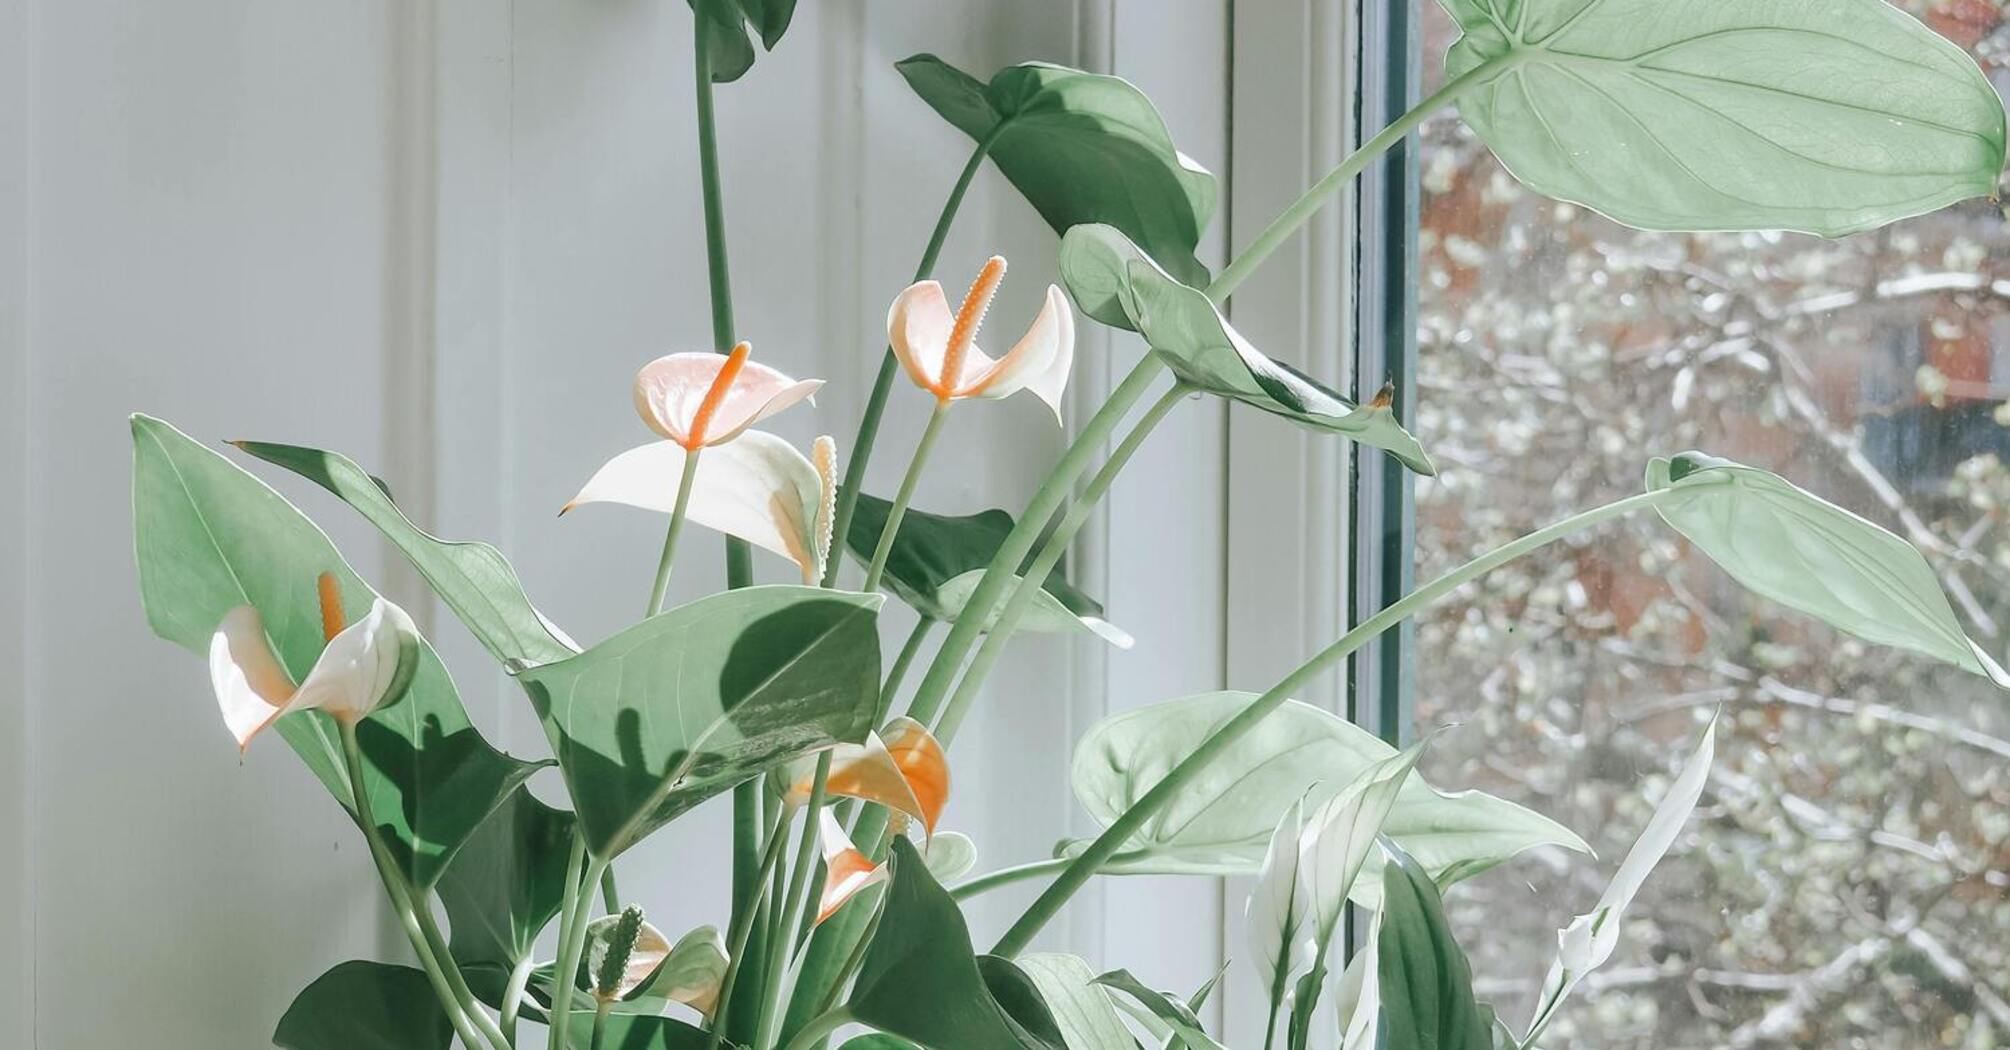 How to fertilize spathiphyllum, also called peace lily